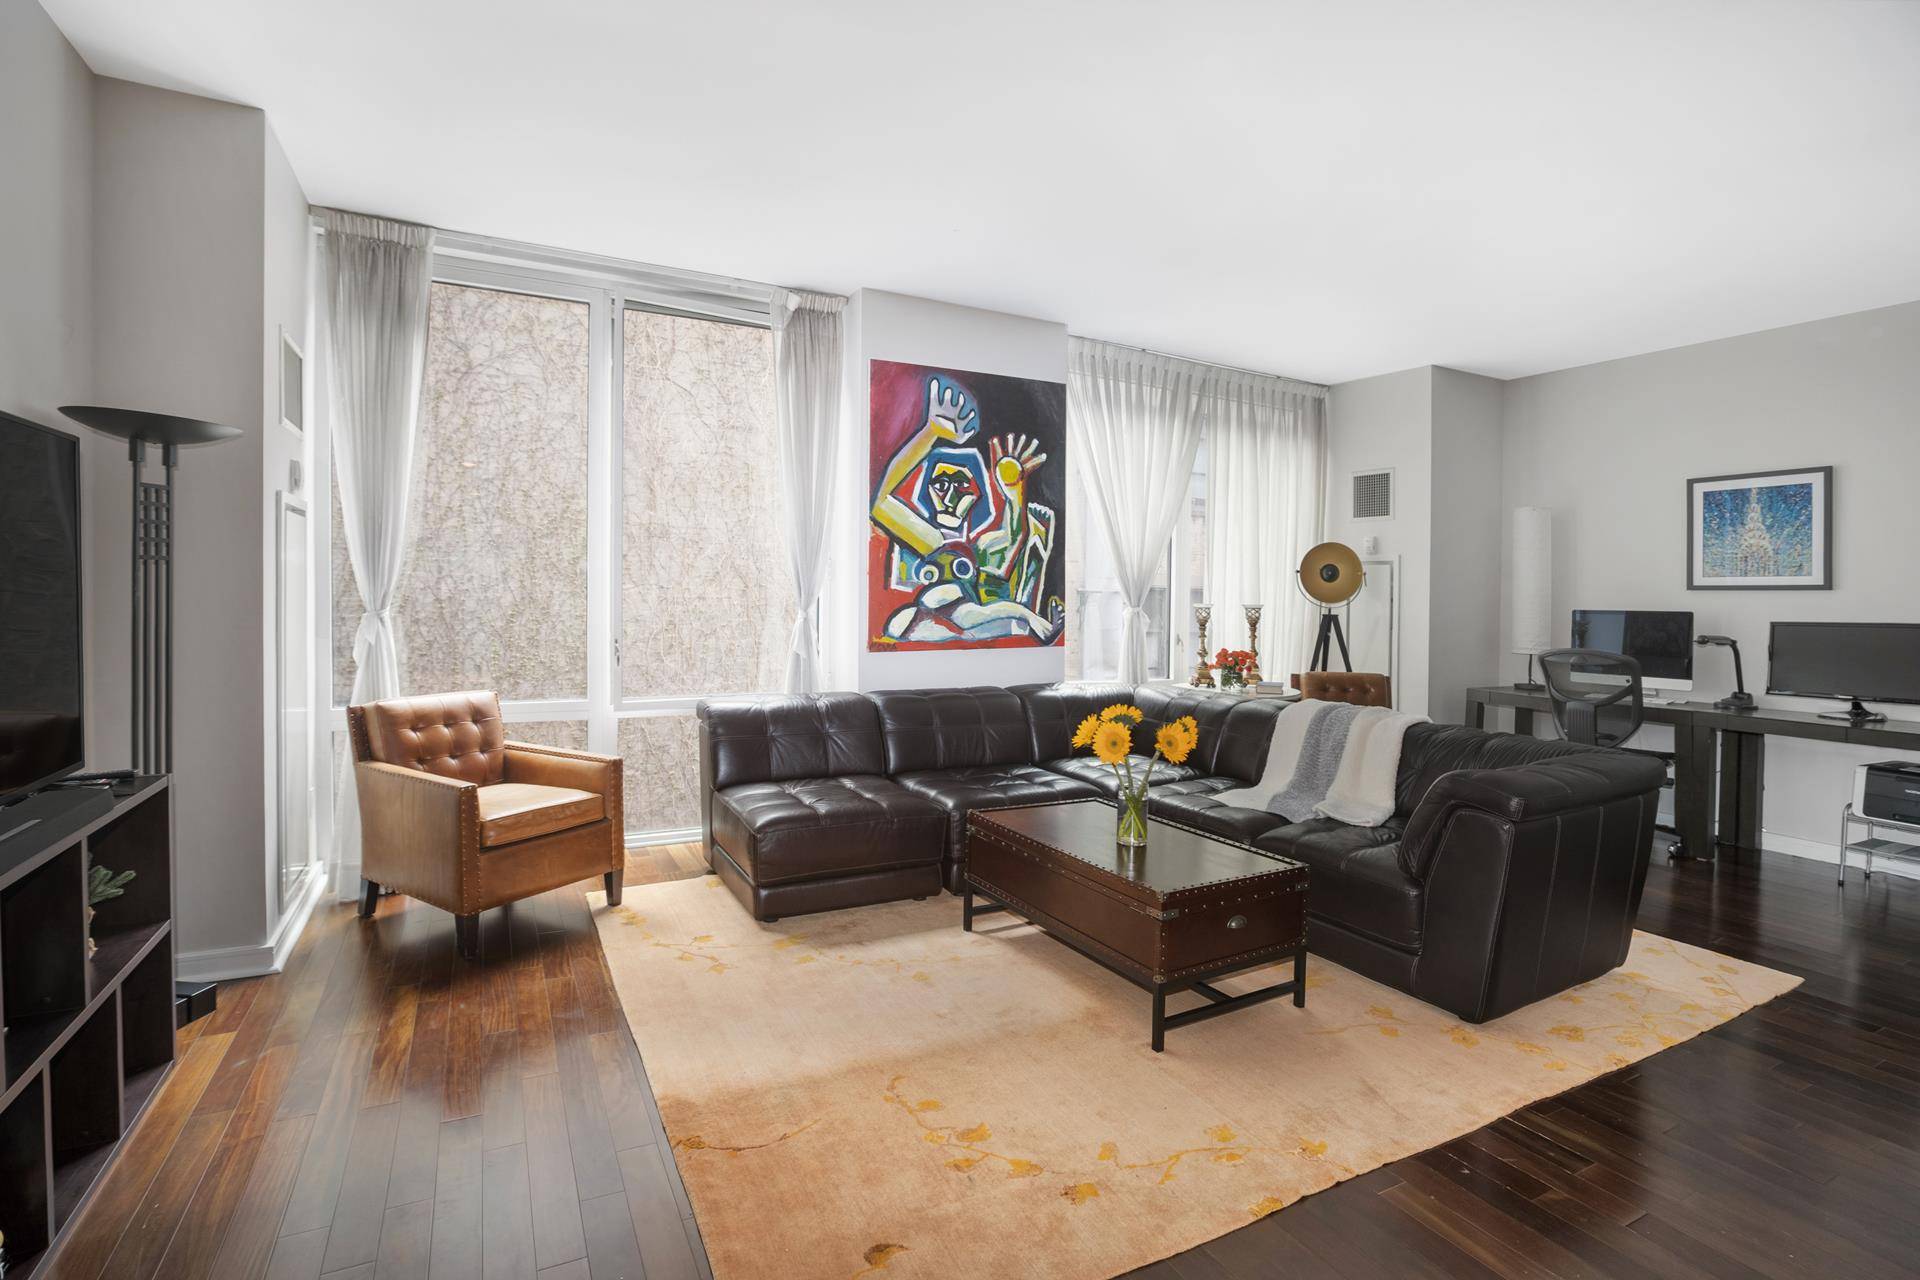 CYOF Now offering apartment 6E at The Chelsea House 130 West 19th Street, a two bedroom two bath plus dining office alcove measuring just over 1, 500sf.